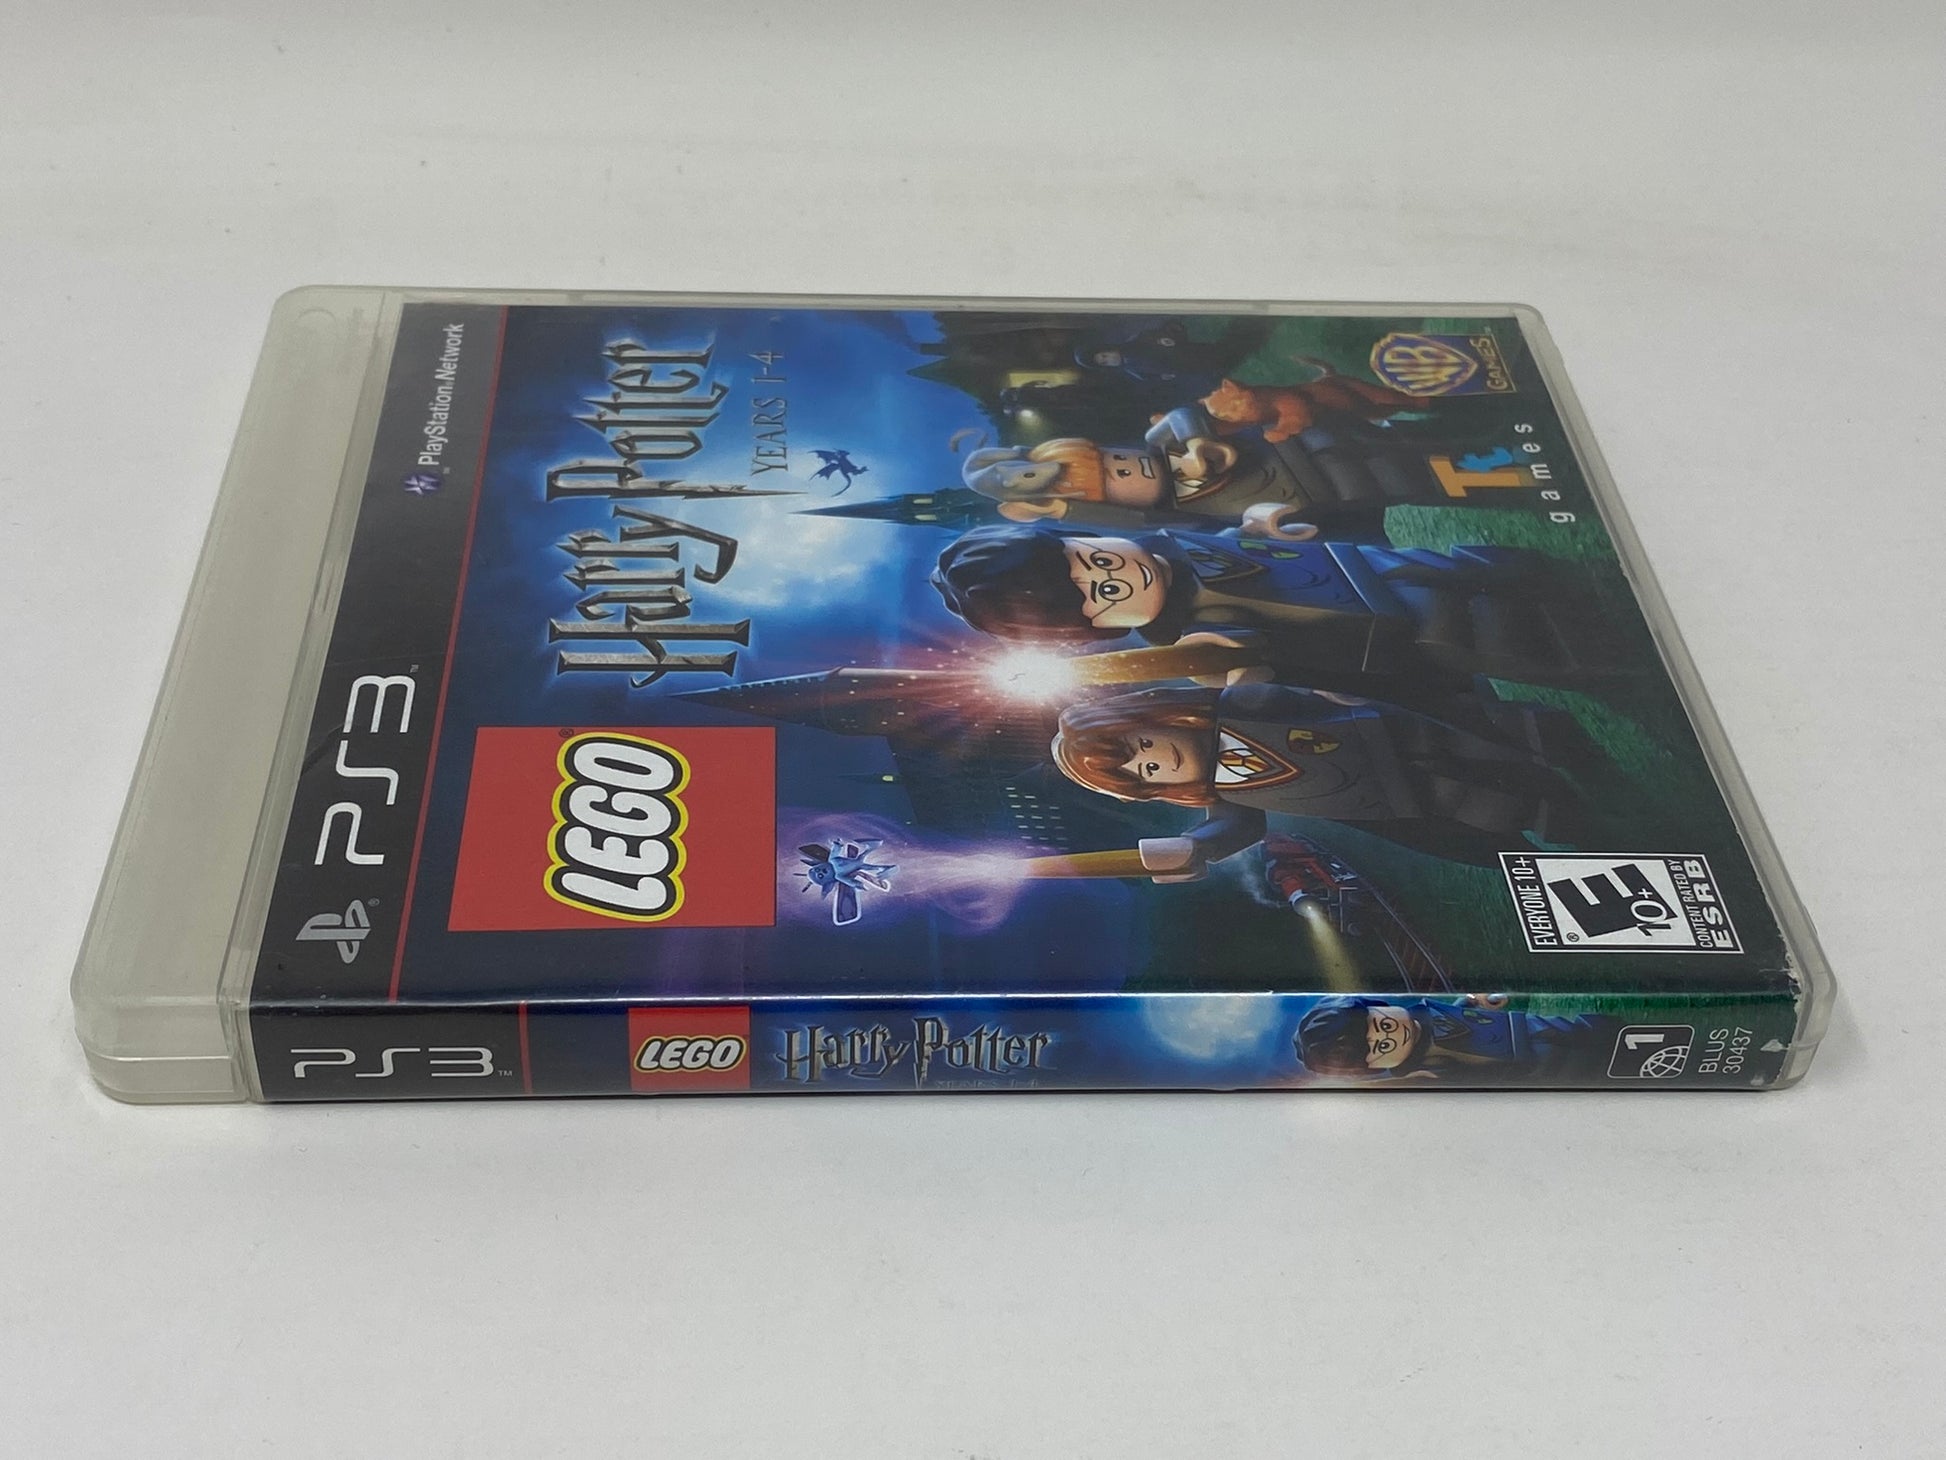 LEGO Harry Potter: Years 1-4 - PlayStation 3